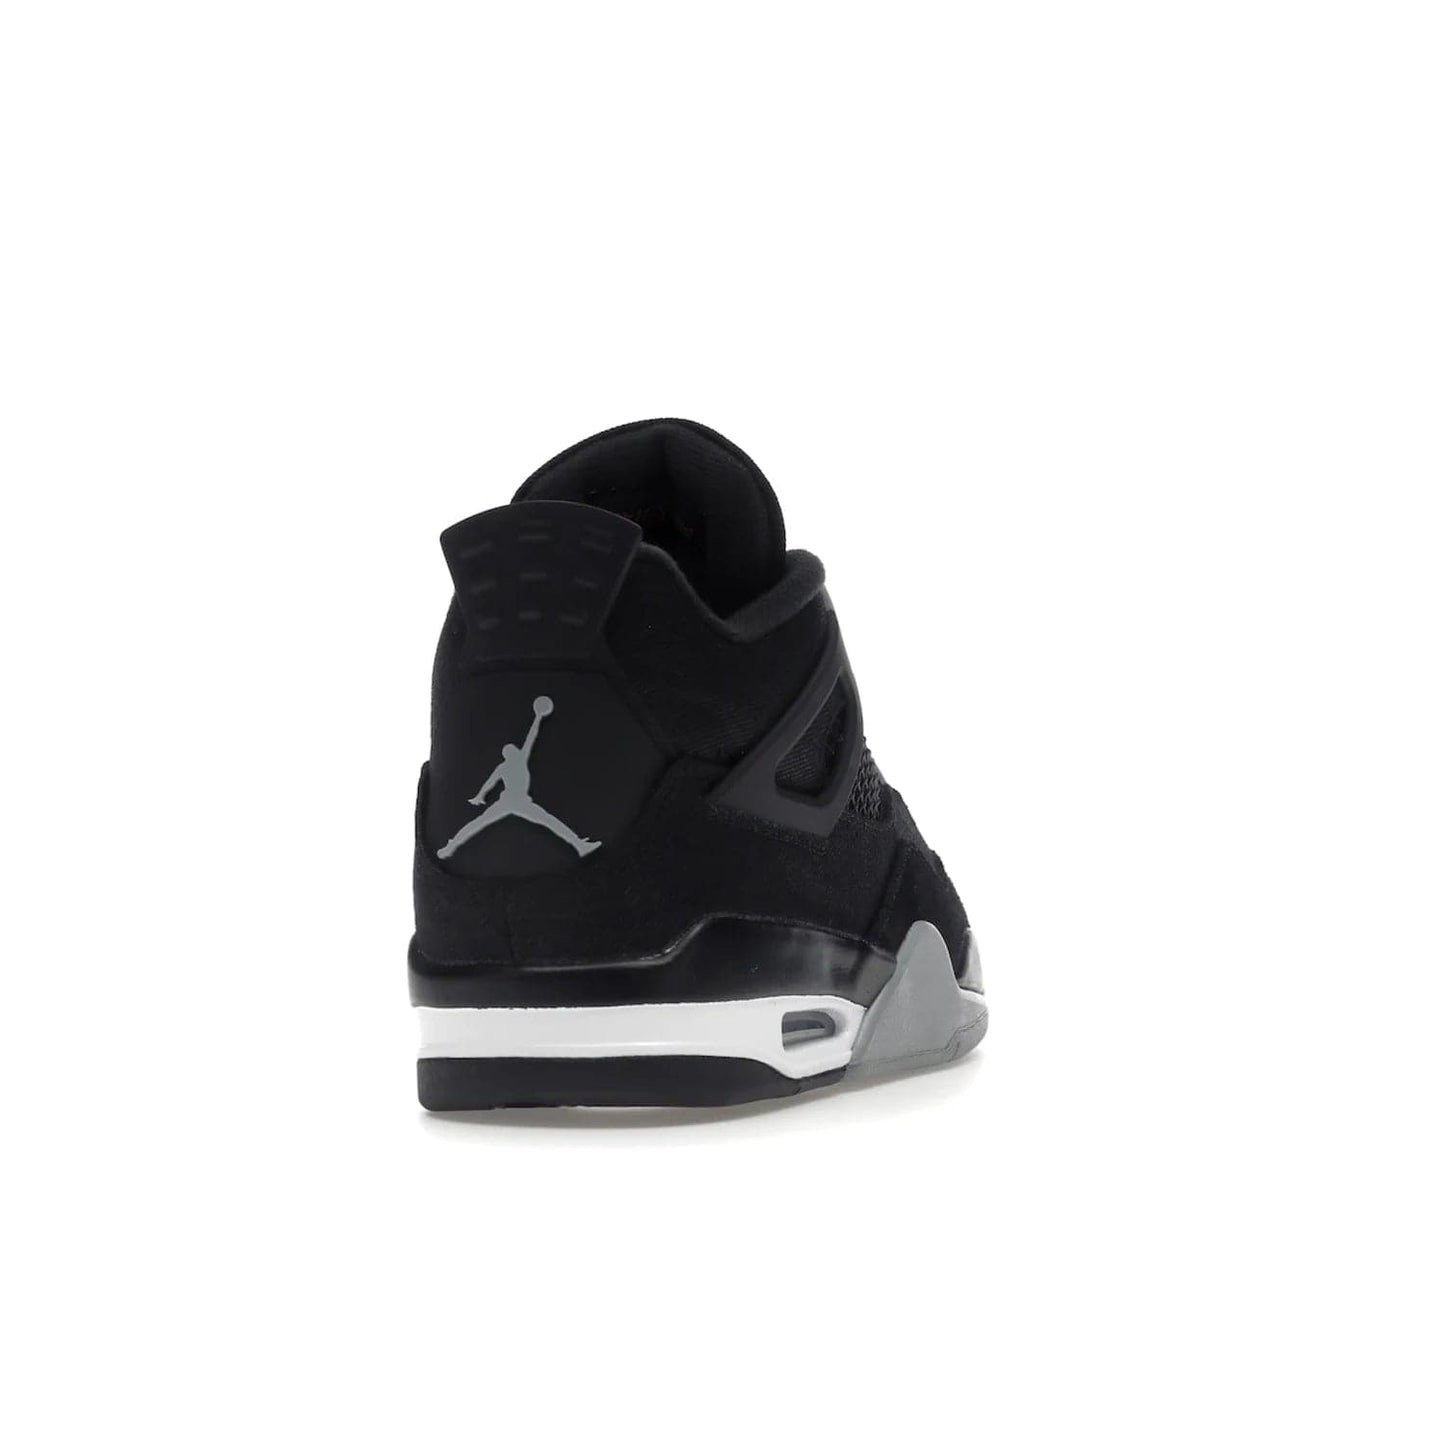 Jordan 4 Retro SE Black Canvas - Image 30 - Only at www.BallersClubKickz.com - The Air Jordan 4 Retro SE Black Canvas brings timeless style and modern luxury. Classic mid-top sneaker in black canvas and grey suede with tonal Jumpman logo, Flight logo and polyurethane midsole with visible Air-sole cushioning. Refresh your sneaker collection and rock the Air Jordan 4 Retro SE Black Canvas.